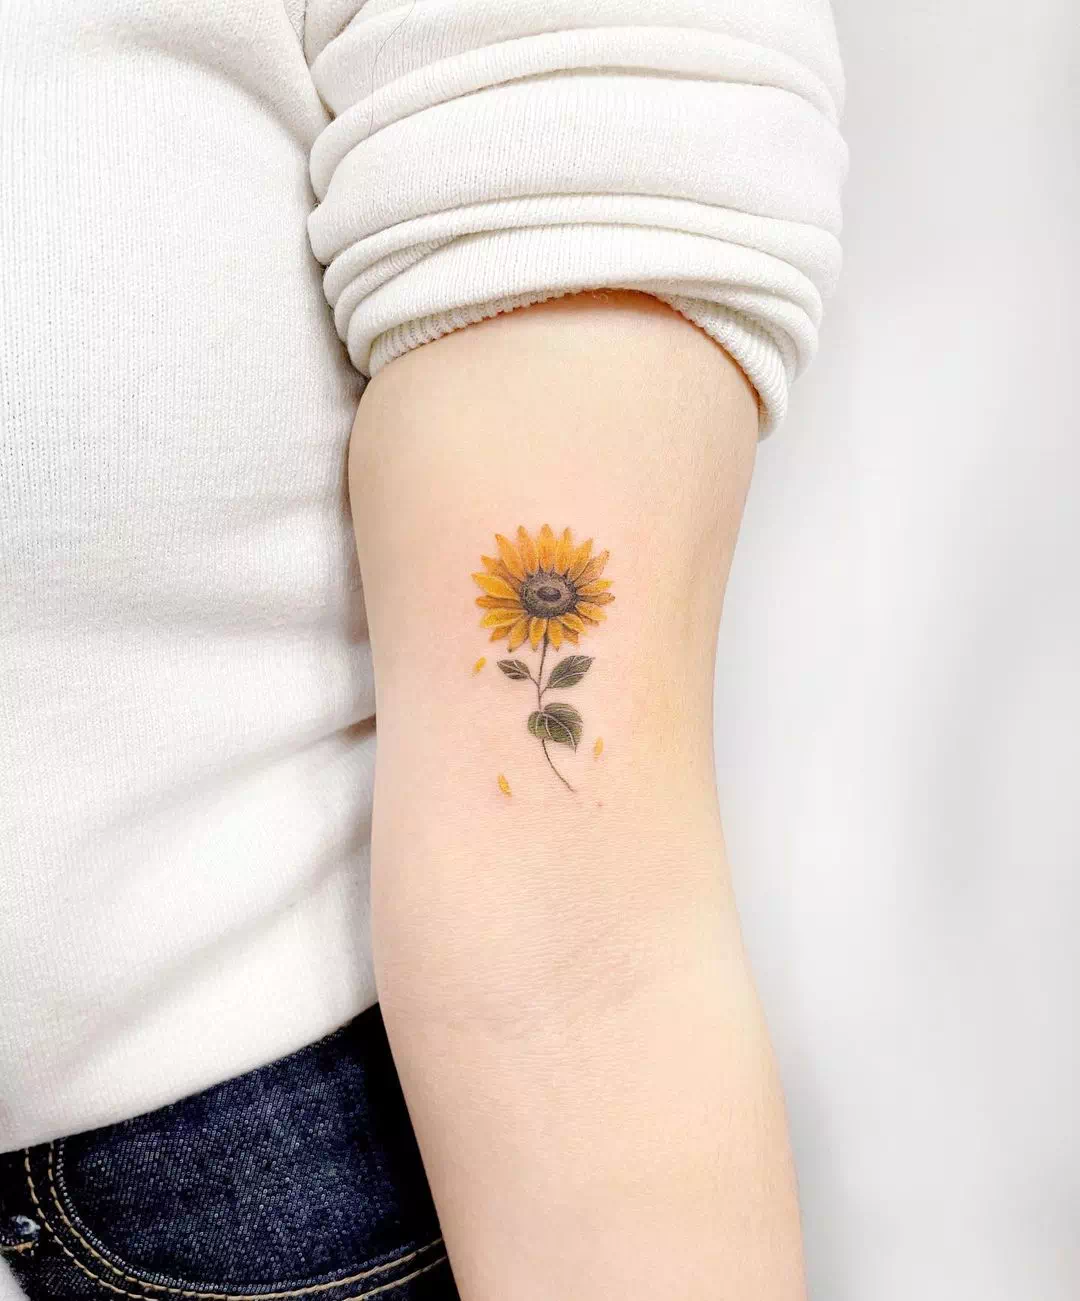    tattoostudio mexico flowers color tattoo sc linetattoo  finelintetattoo flowerstattoo sunflower tattoos mexican artist   Instagram